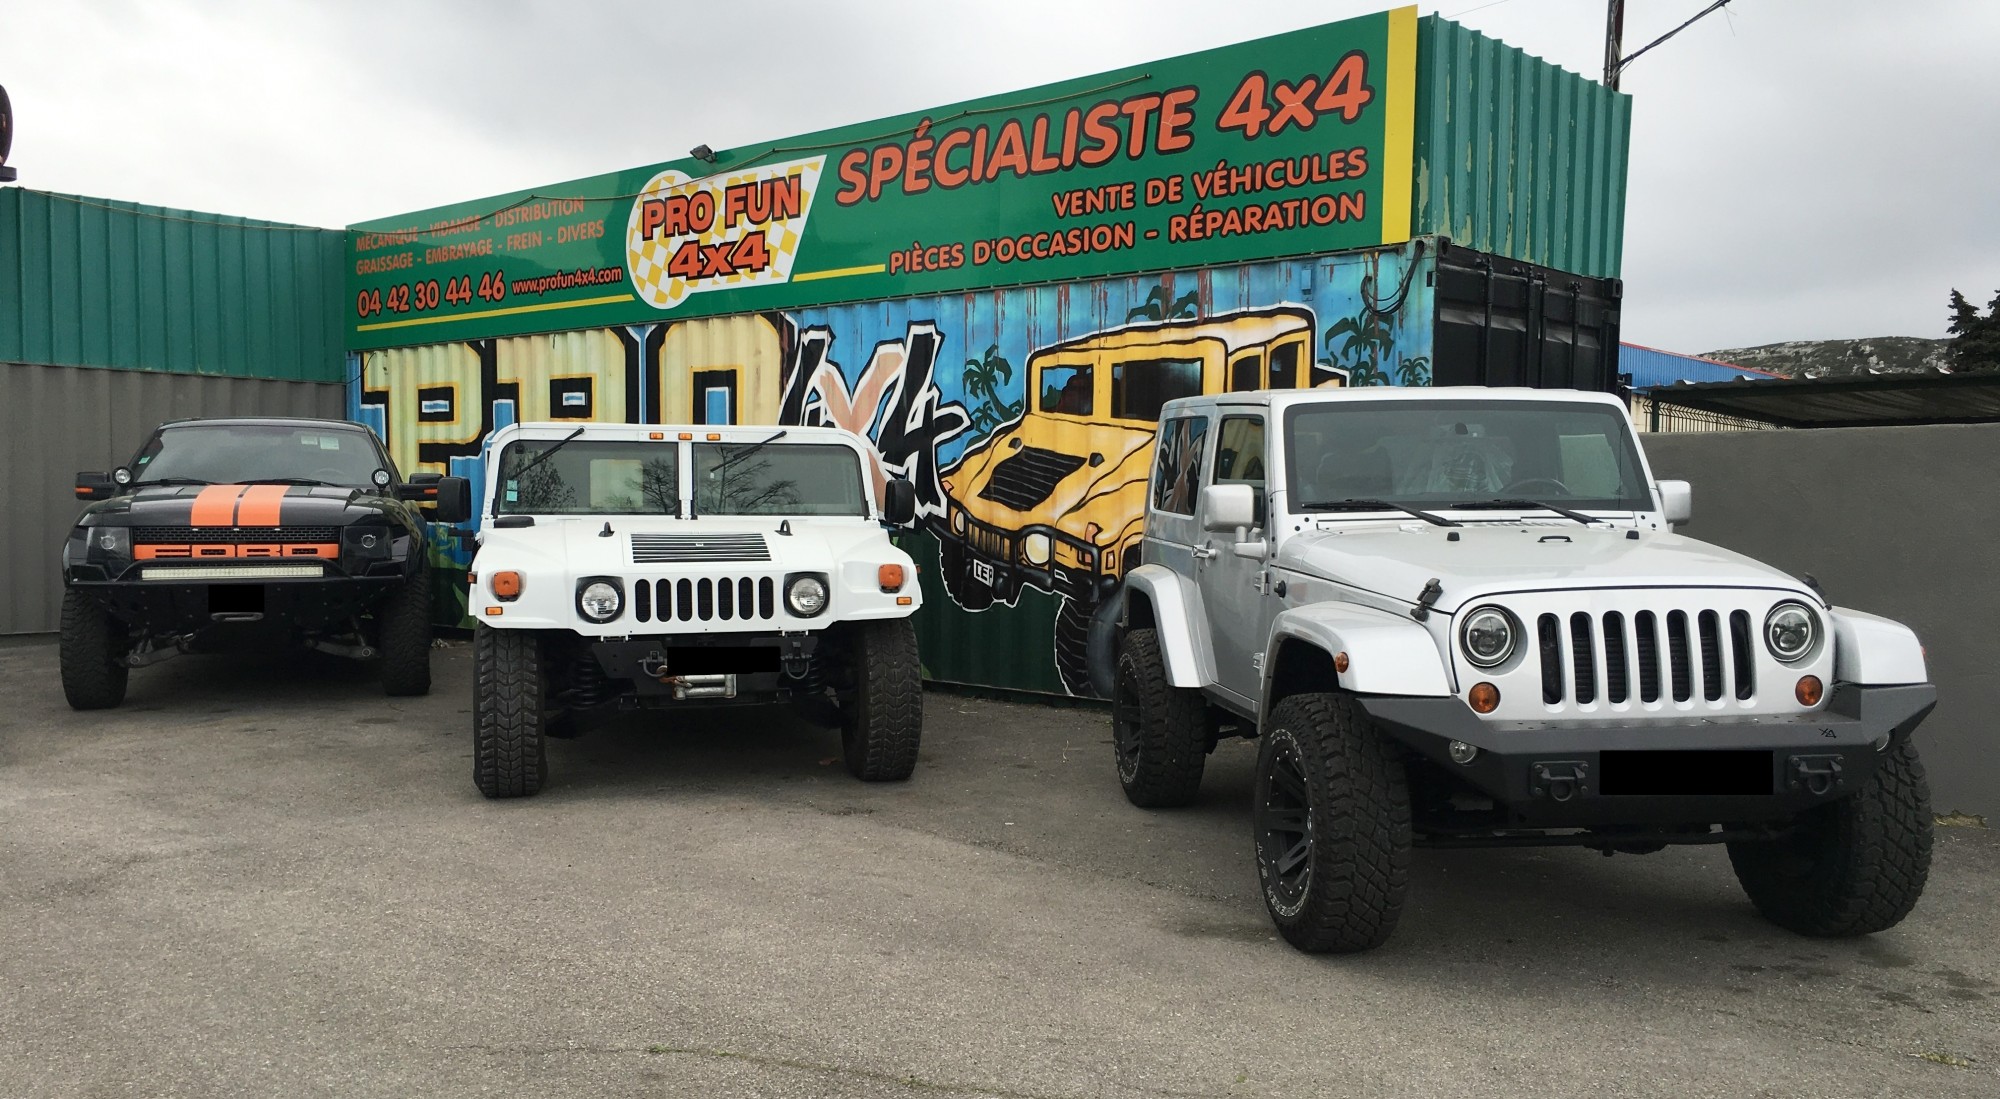 Ford F150, Hummer H1 et Jeep Wrangler - pro fun 4x4